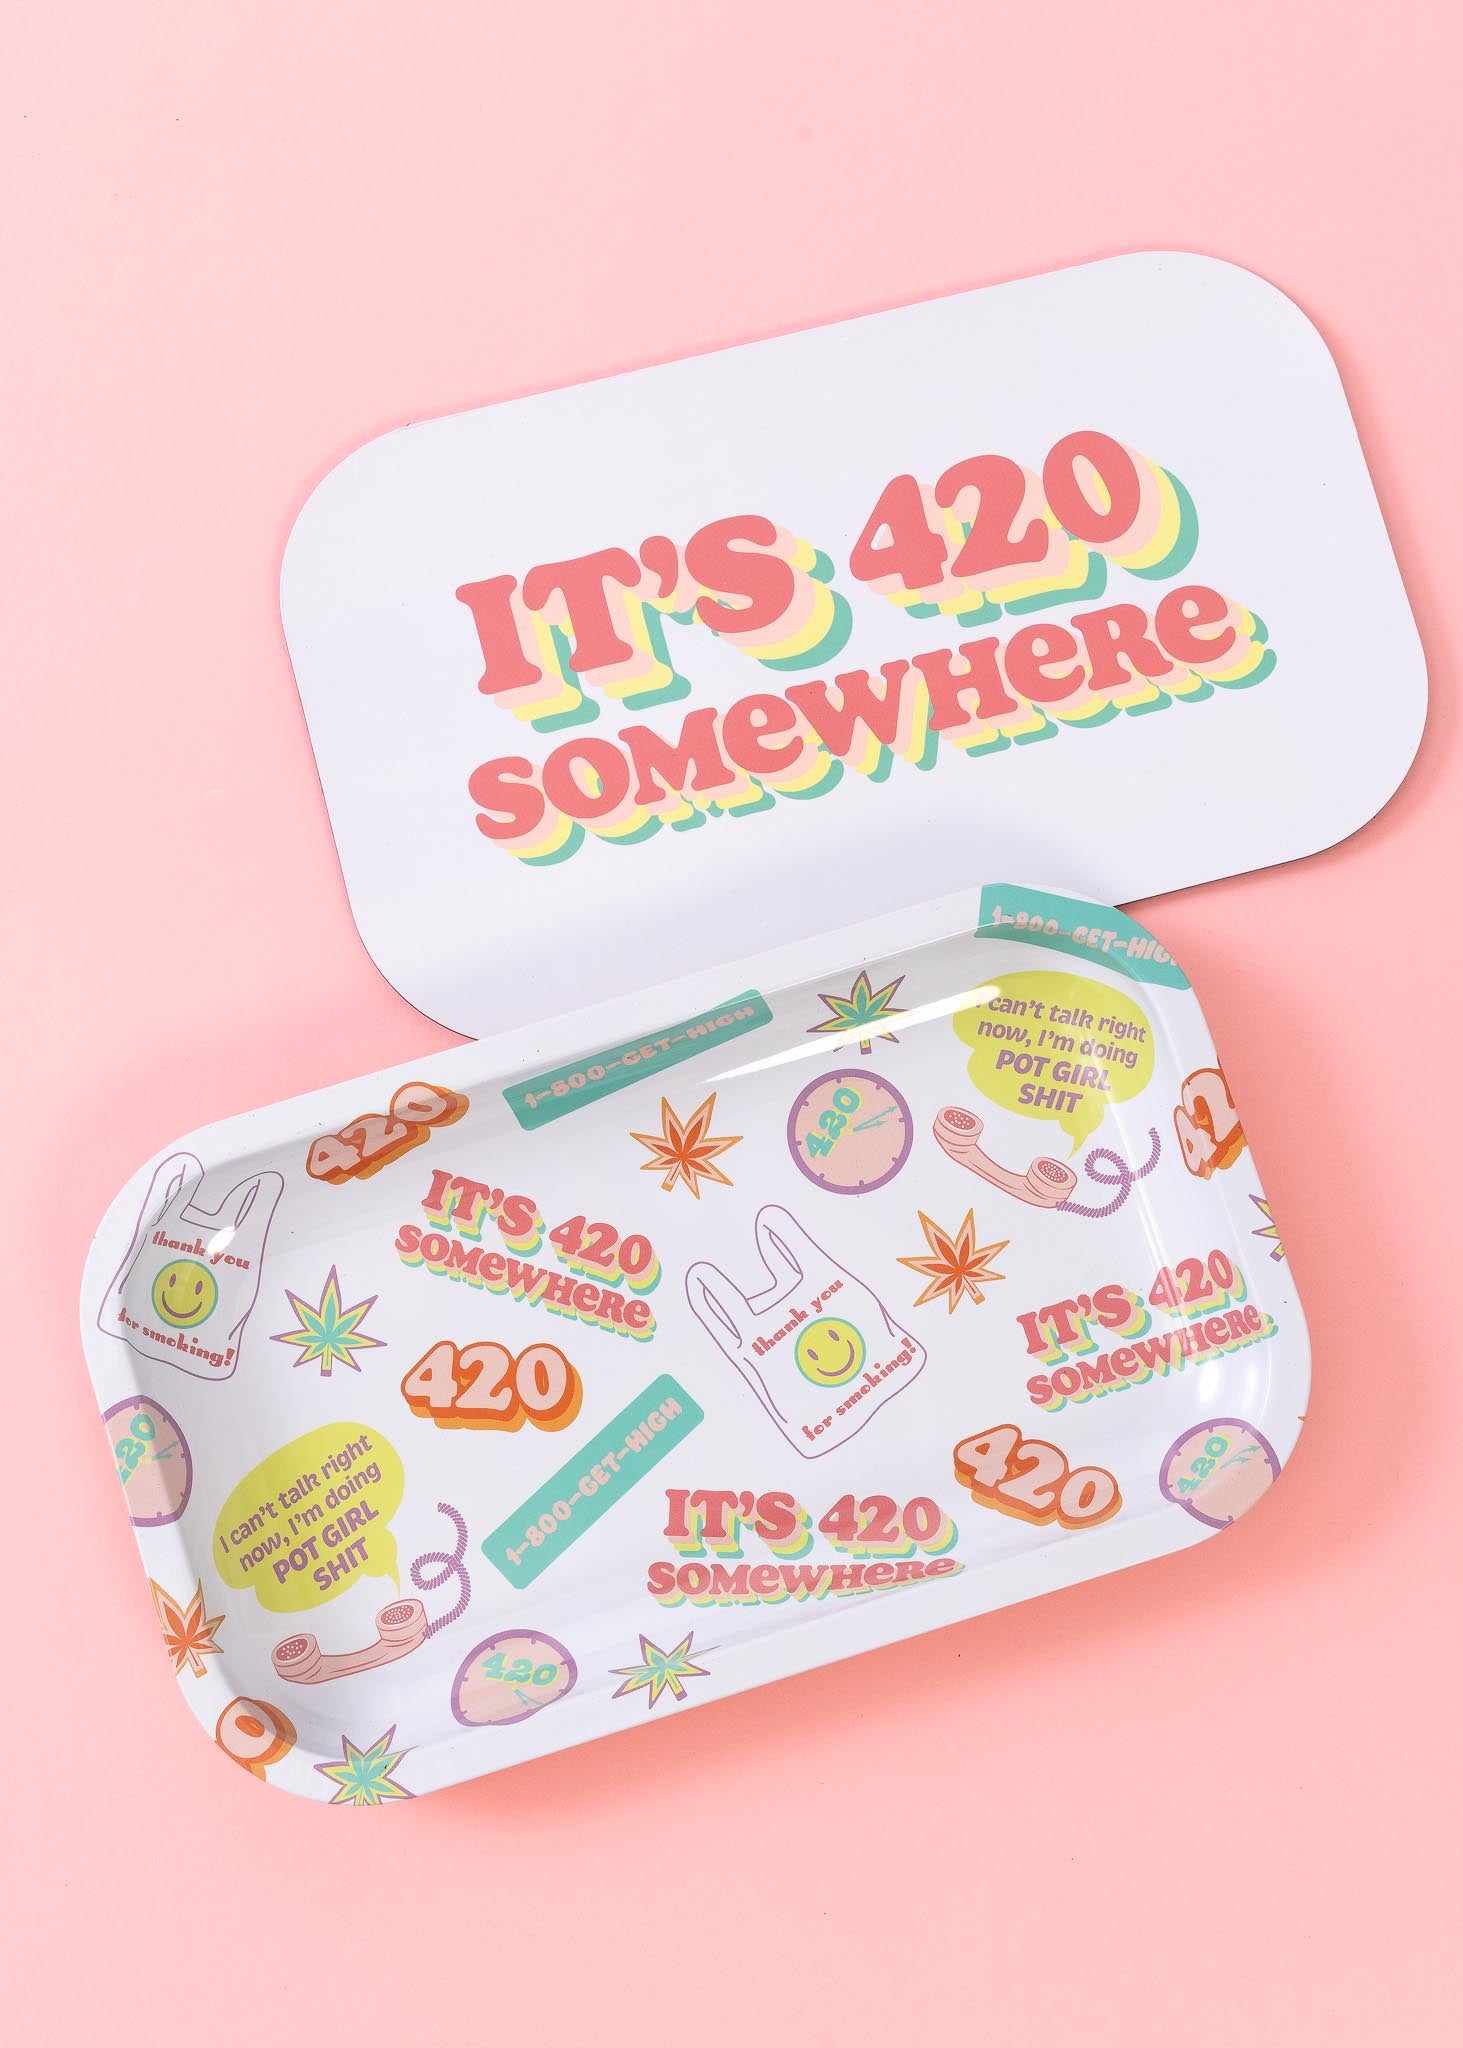 You Can't Buy Happiness But You Can Buy Weed Rolling Tray Set